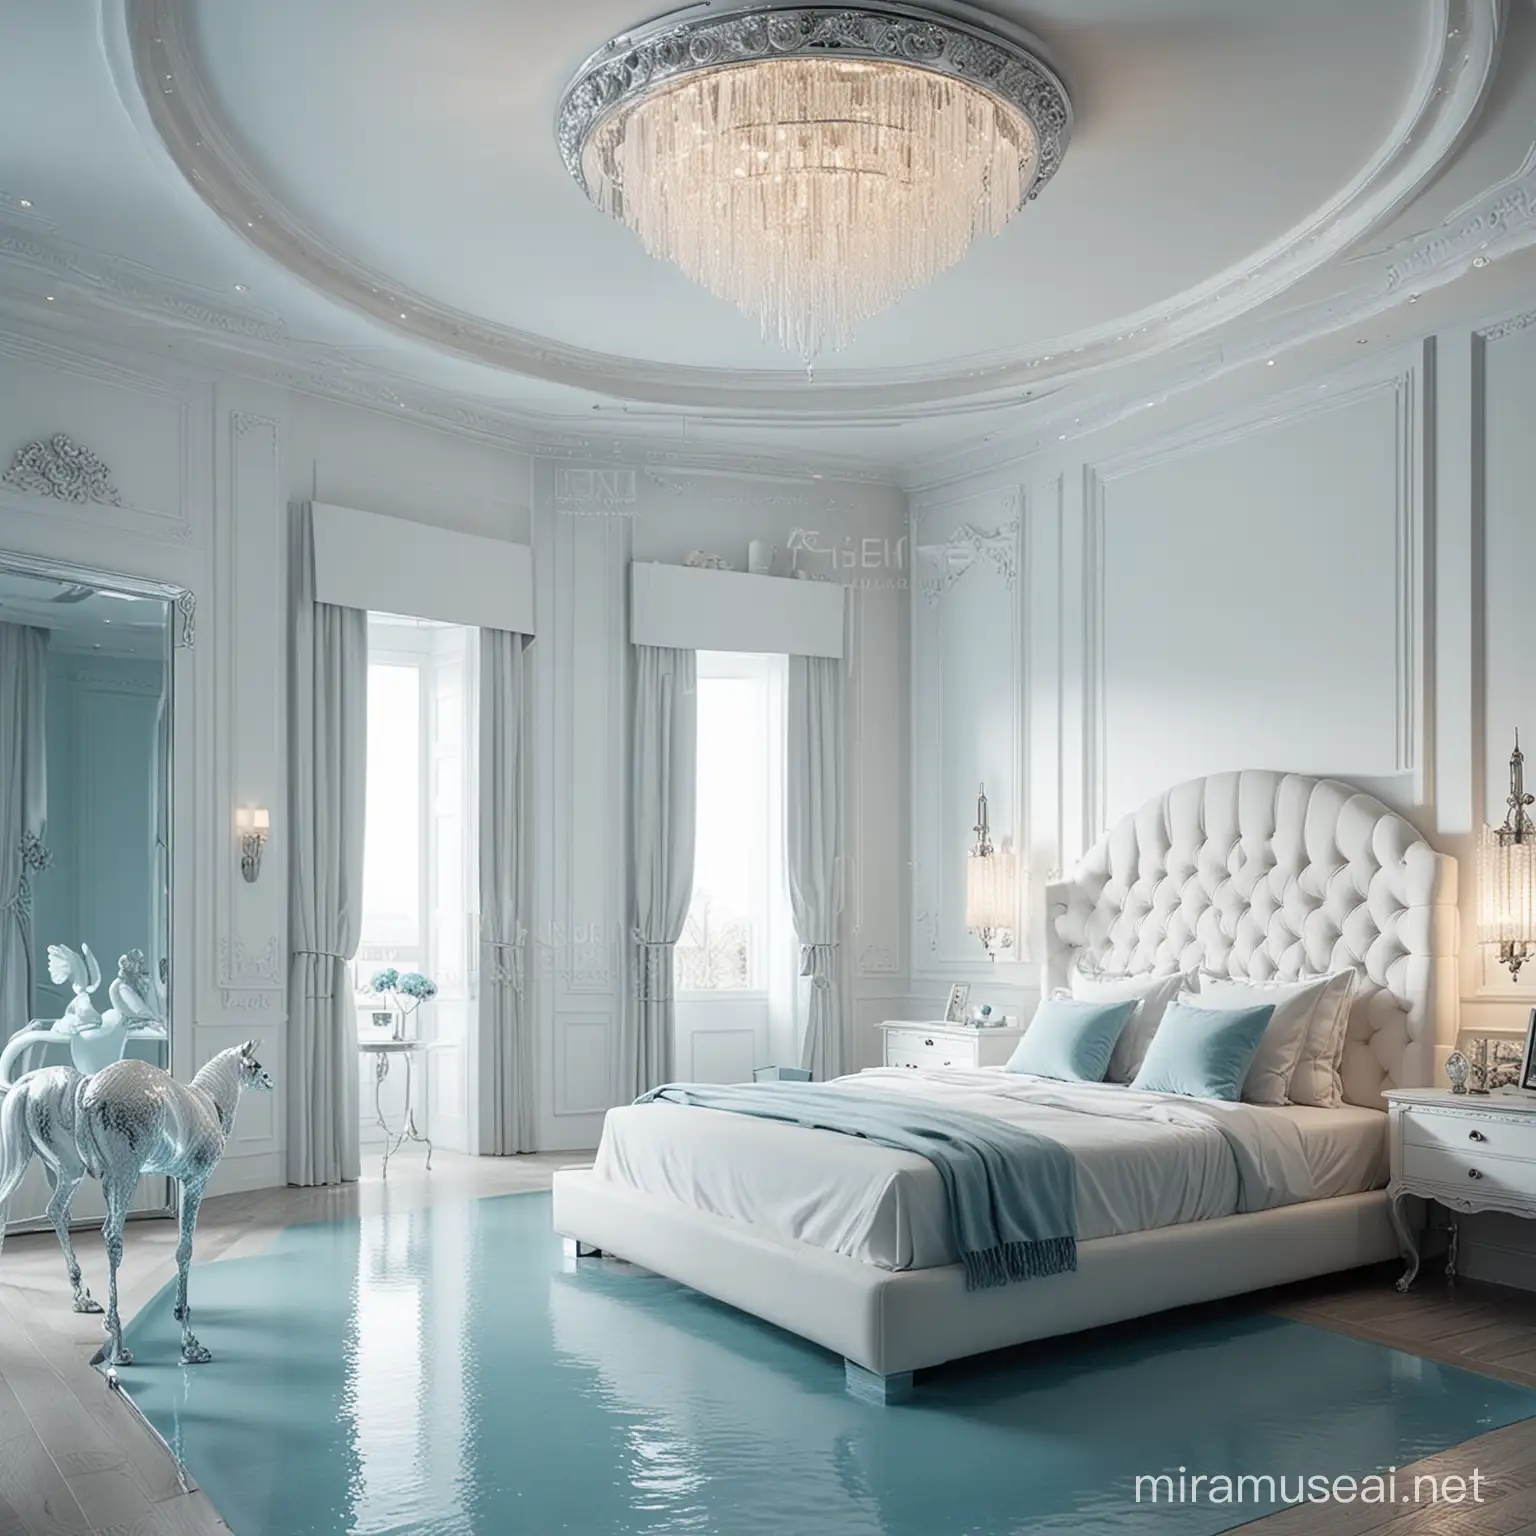 Luxurious Bedroom Interior with Glass Pool and Futuristic Design